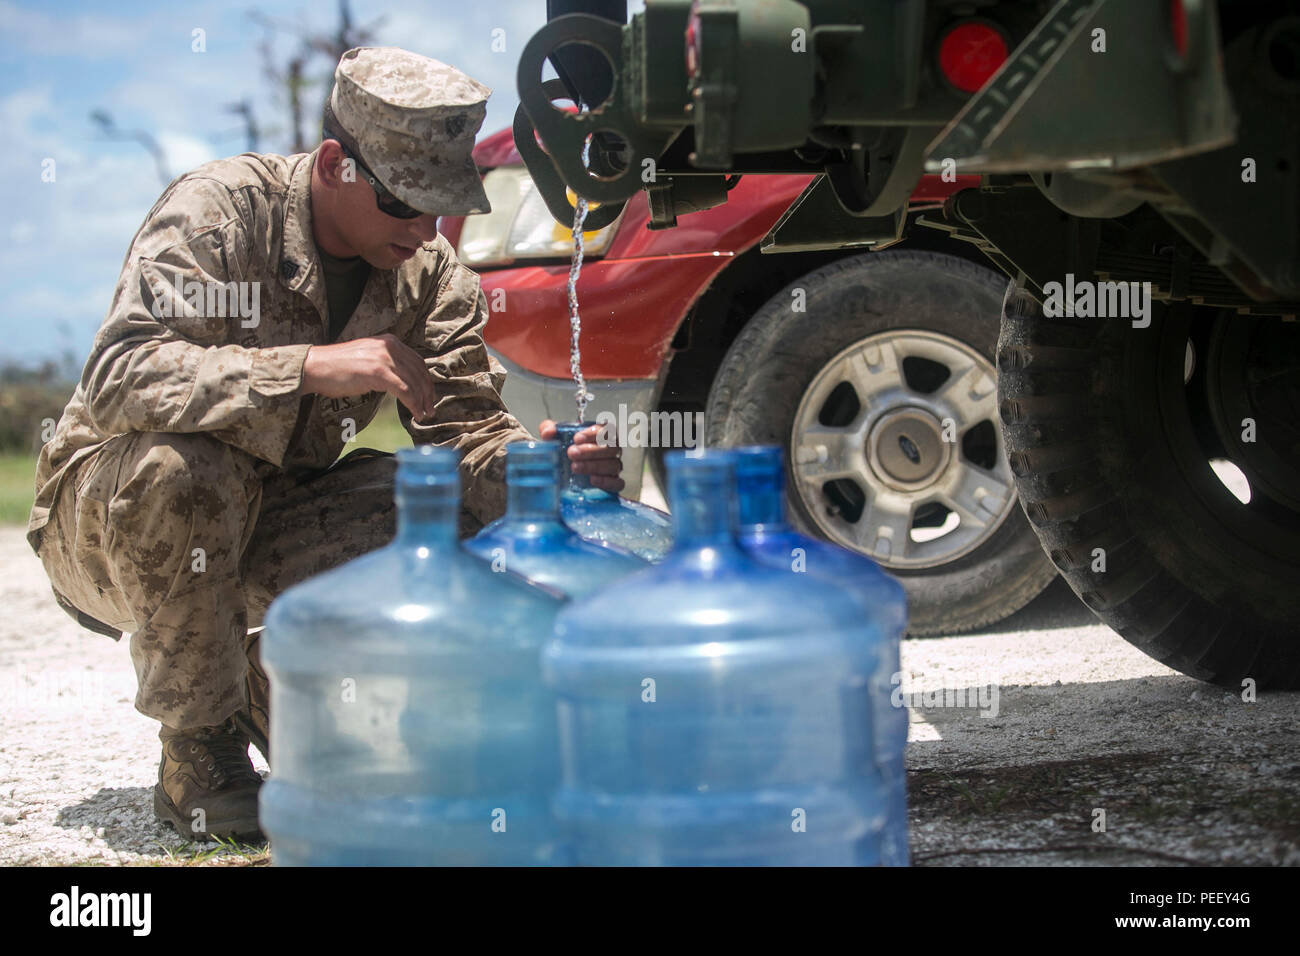 U.S. Marine Sgt. Jeffery Grebbs, with Combat  Logistics Battalion 31, 31st Marine Expeditionary Unit, distributes water to local civilians as part of typhoon relief efforts in Saipan, Aug. 11, 2015. The 31st MEU and the ships of the Bonhomme Richard Amphibious Ready Group are assisting the Federal Emergency Management Agency with distributing emergency relief supplies to Saipan after the island was struck by Typhoon Soudelor Aug. 2-3. (U.S. Marine Corps photo by Lance Cpl. Brian Bekkala/Released) Stock Photo